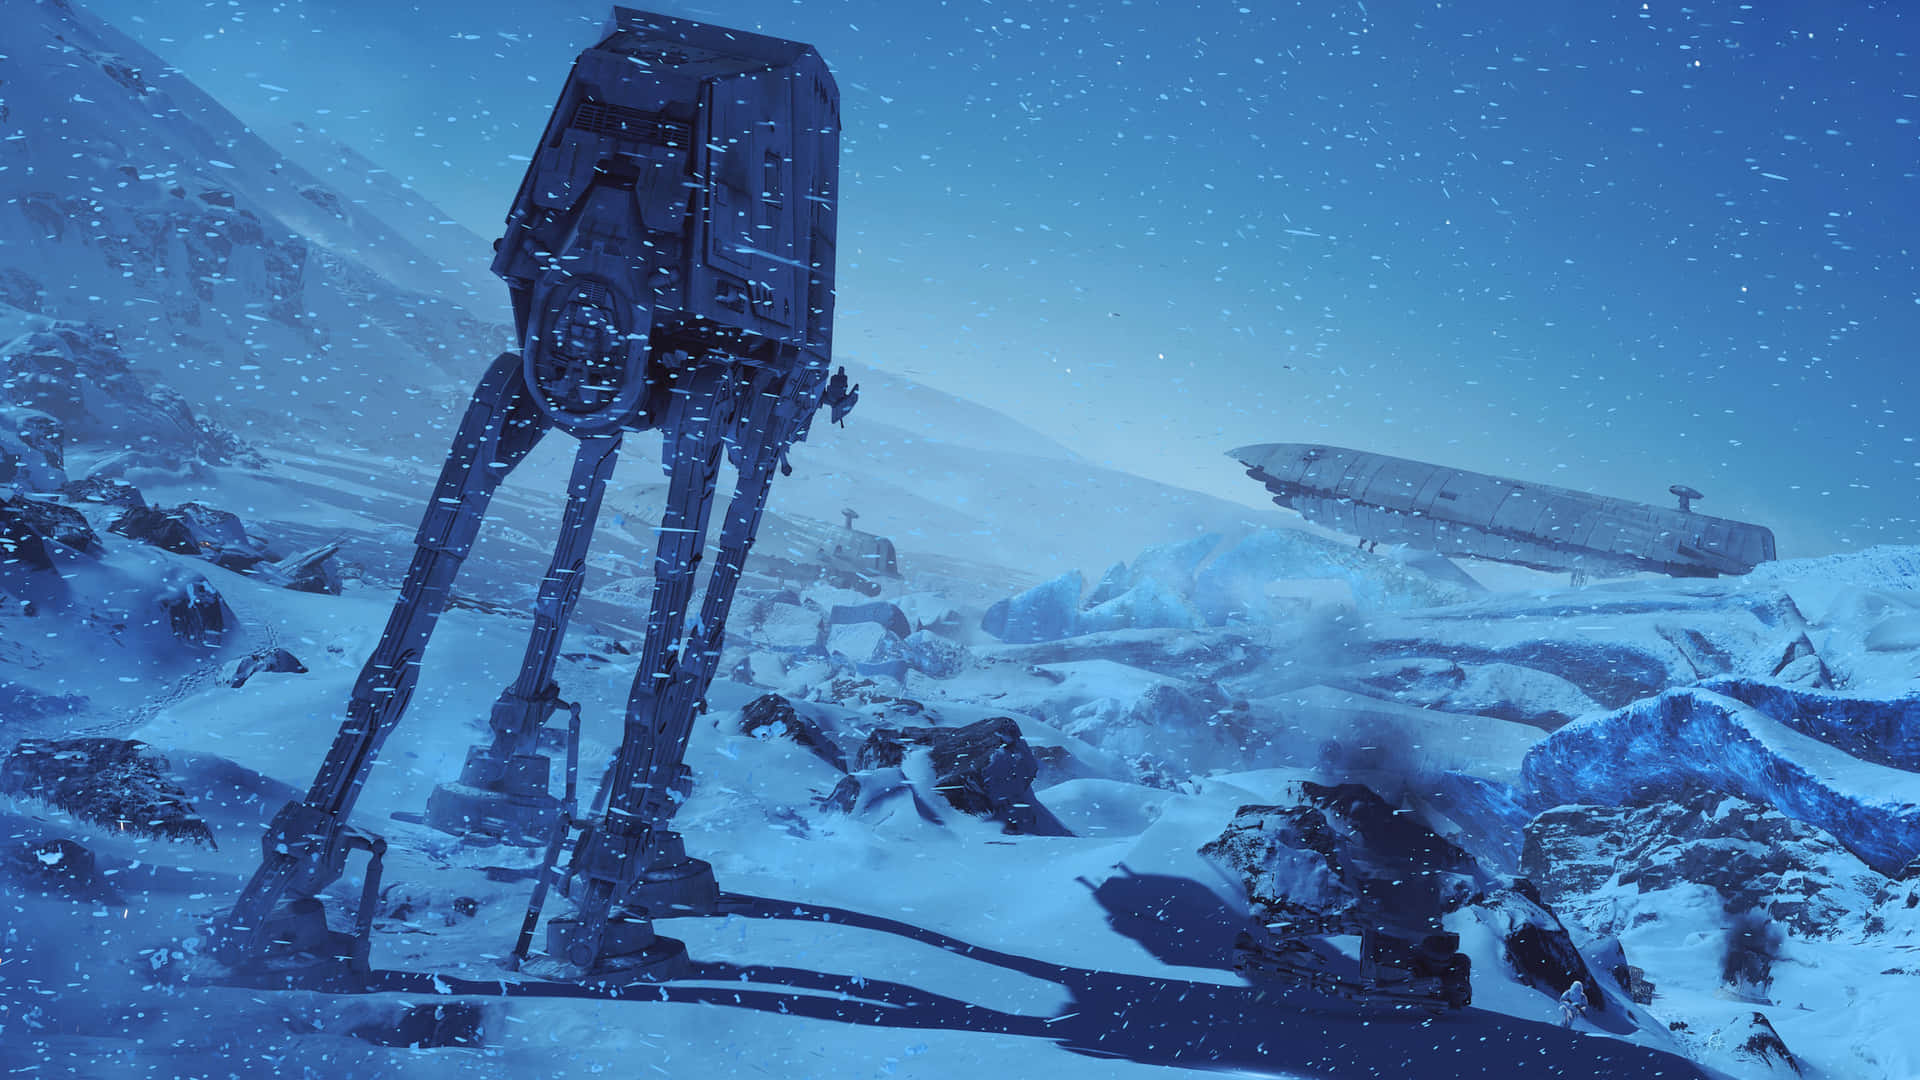 Snowy Hoth Landscape with AT-AT Walkers Wallpaper